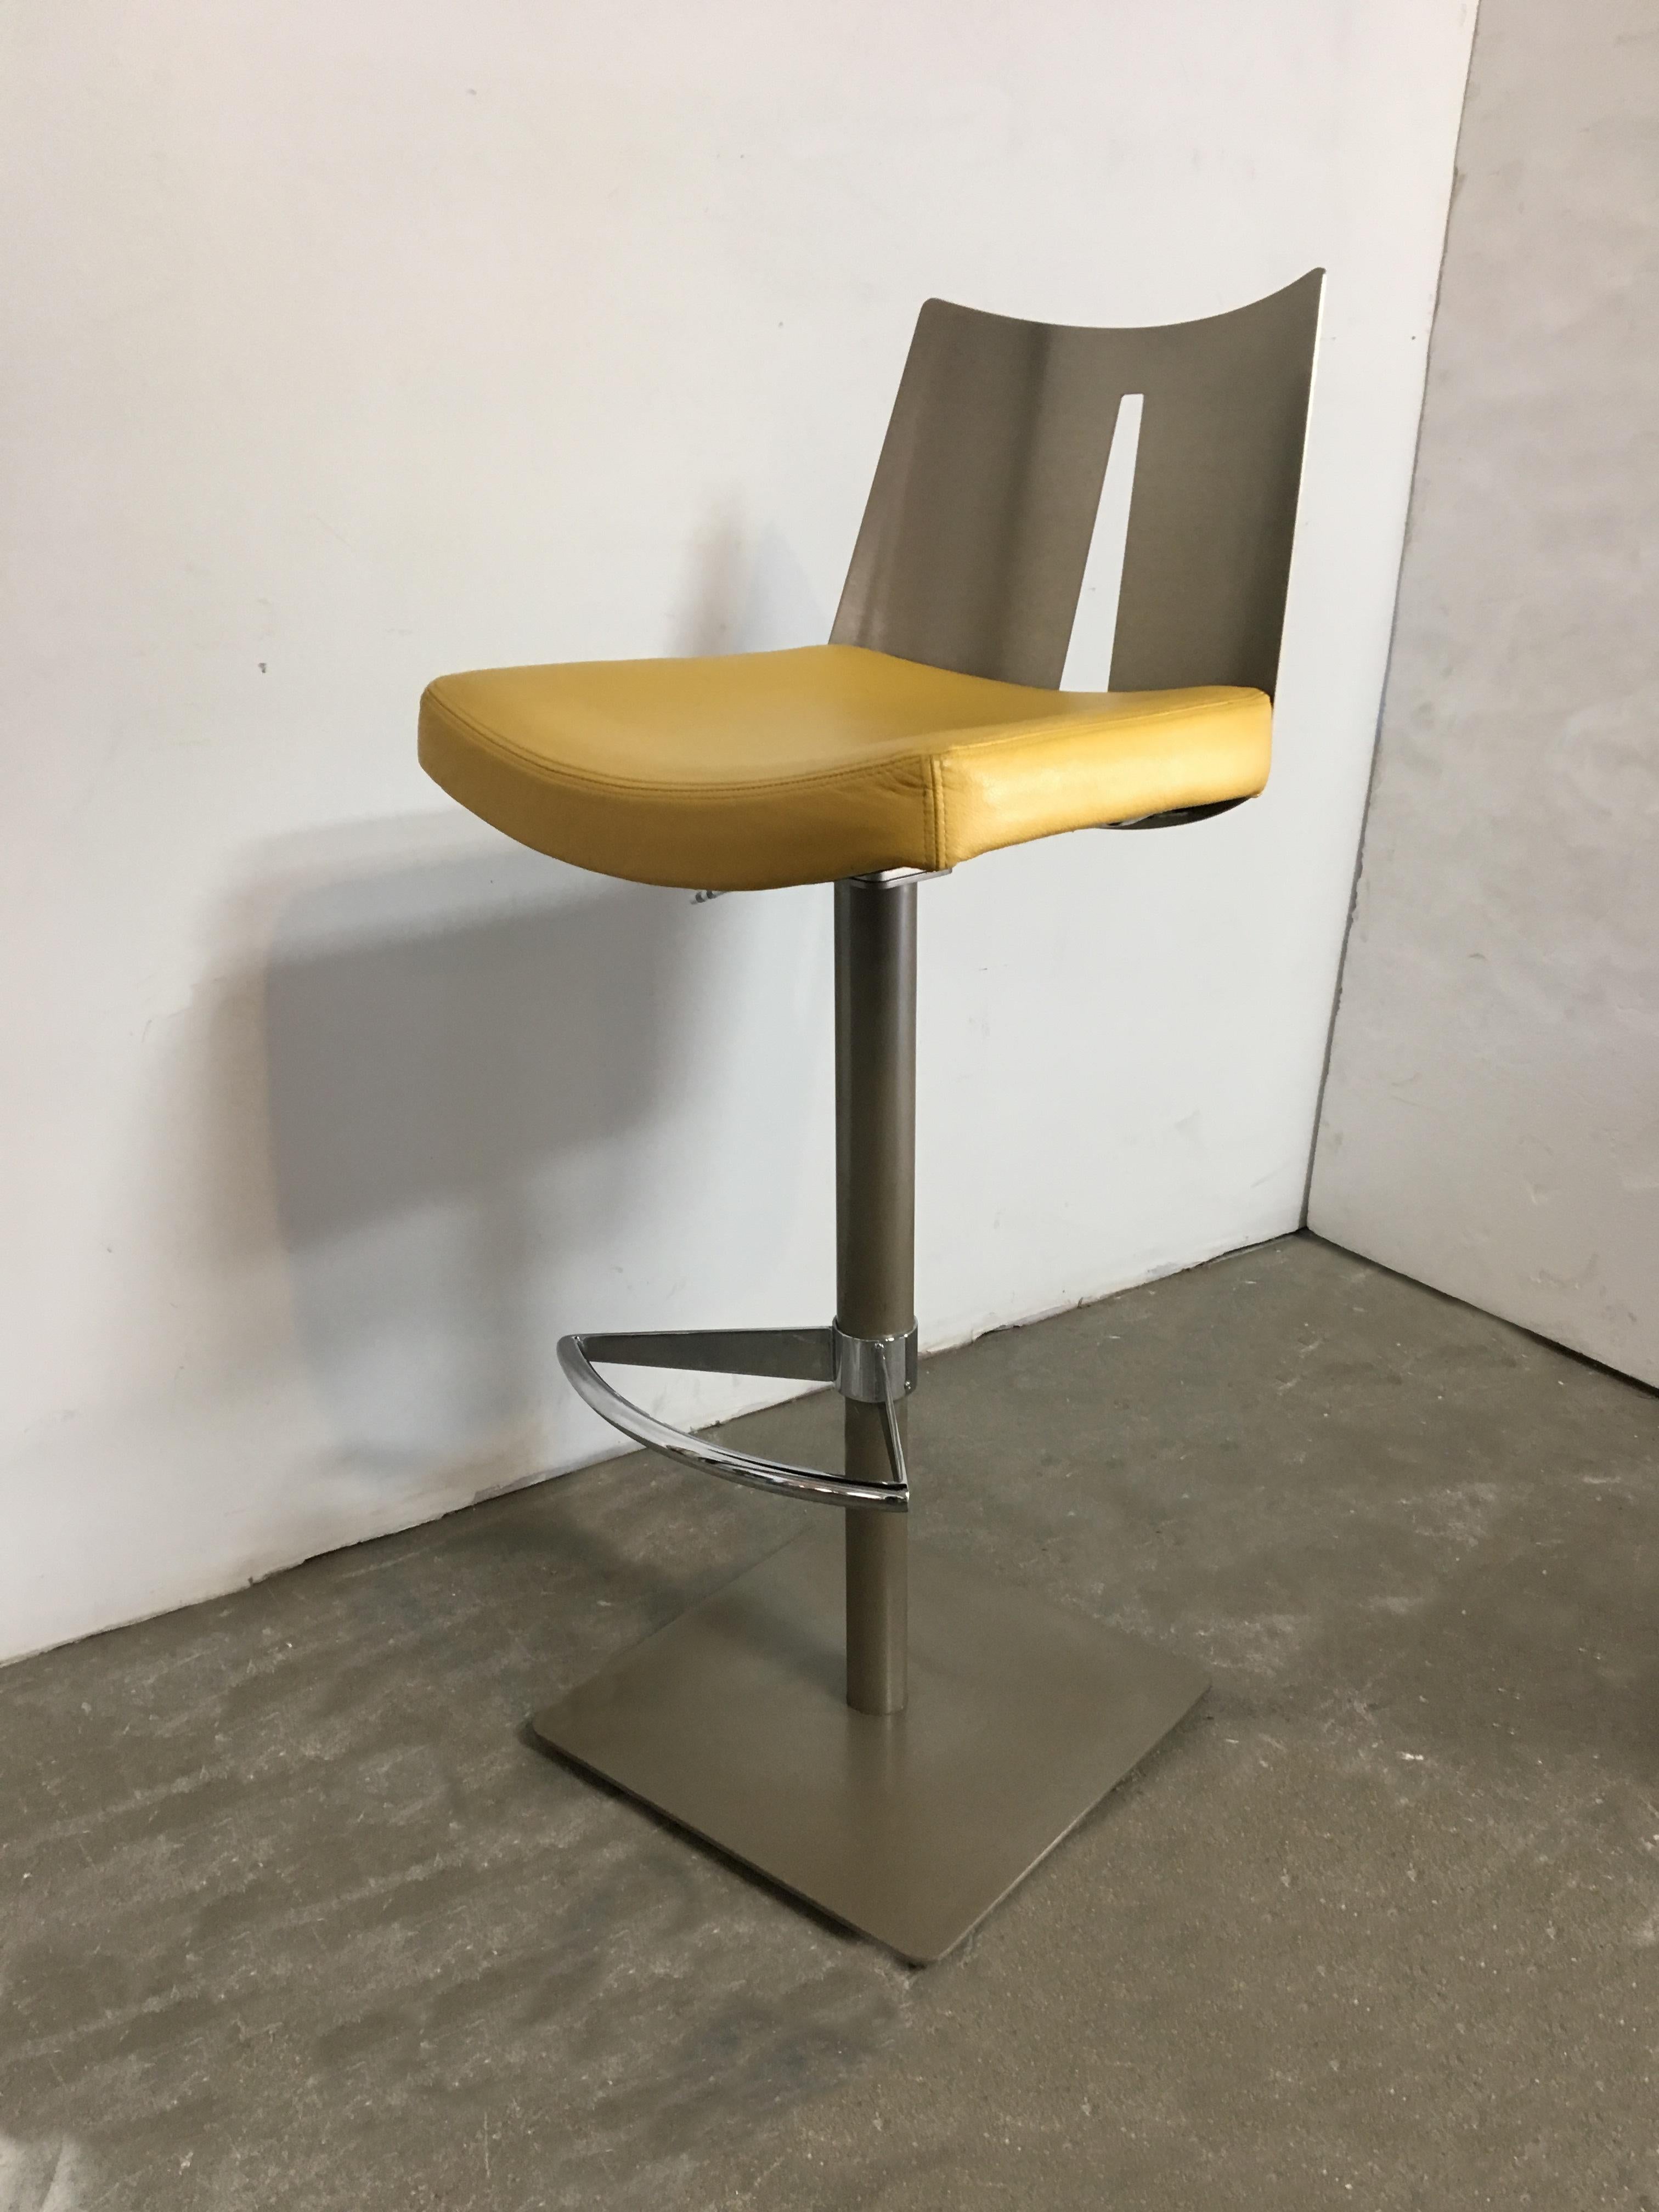 American Pair of Brushed Steel Swivel and Adjustable Barstools or Countertop stools